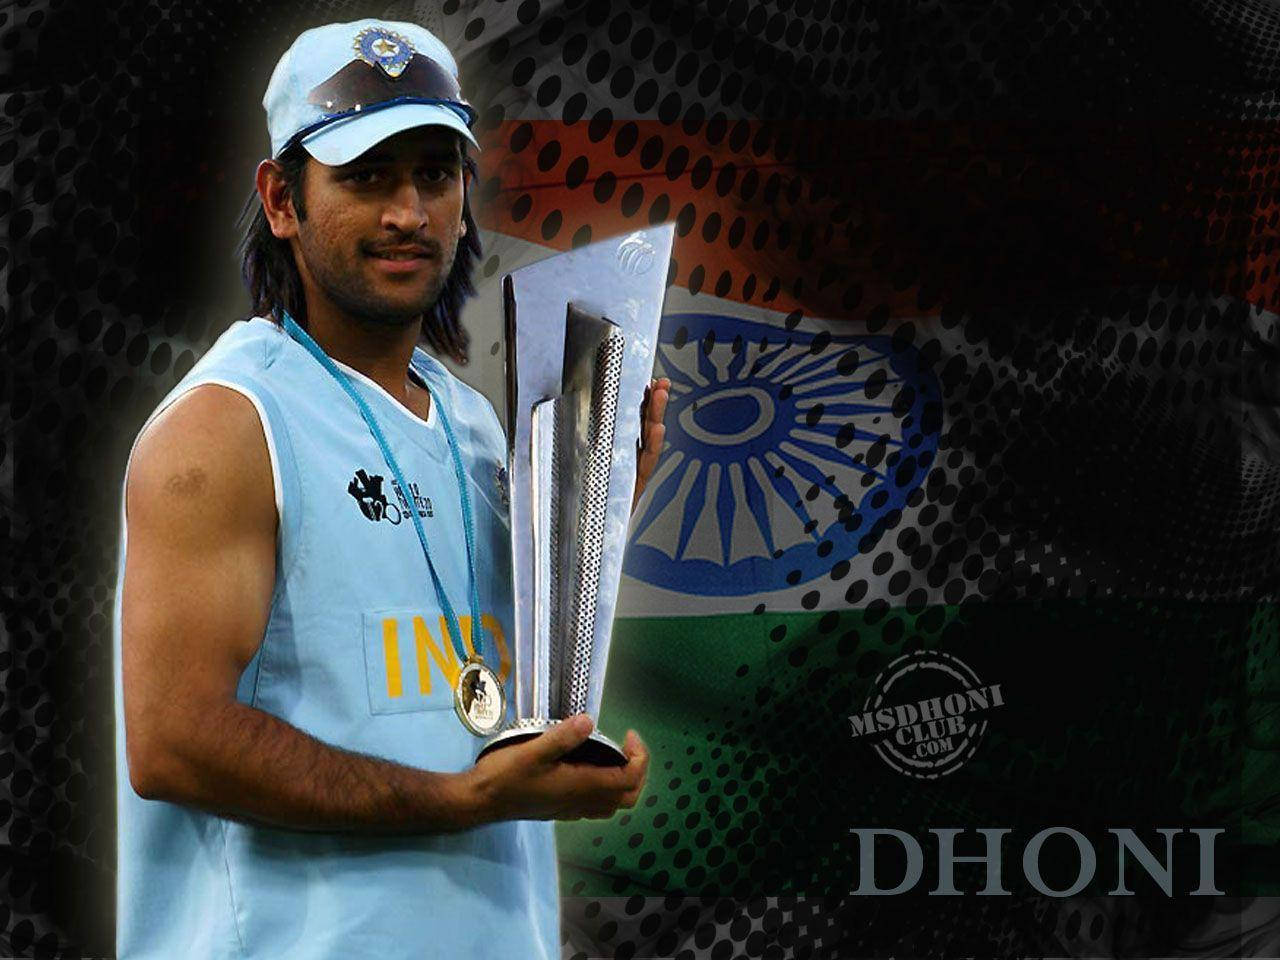 Ms Dhoni T20 World Cup Background